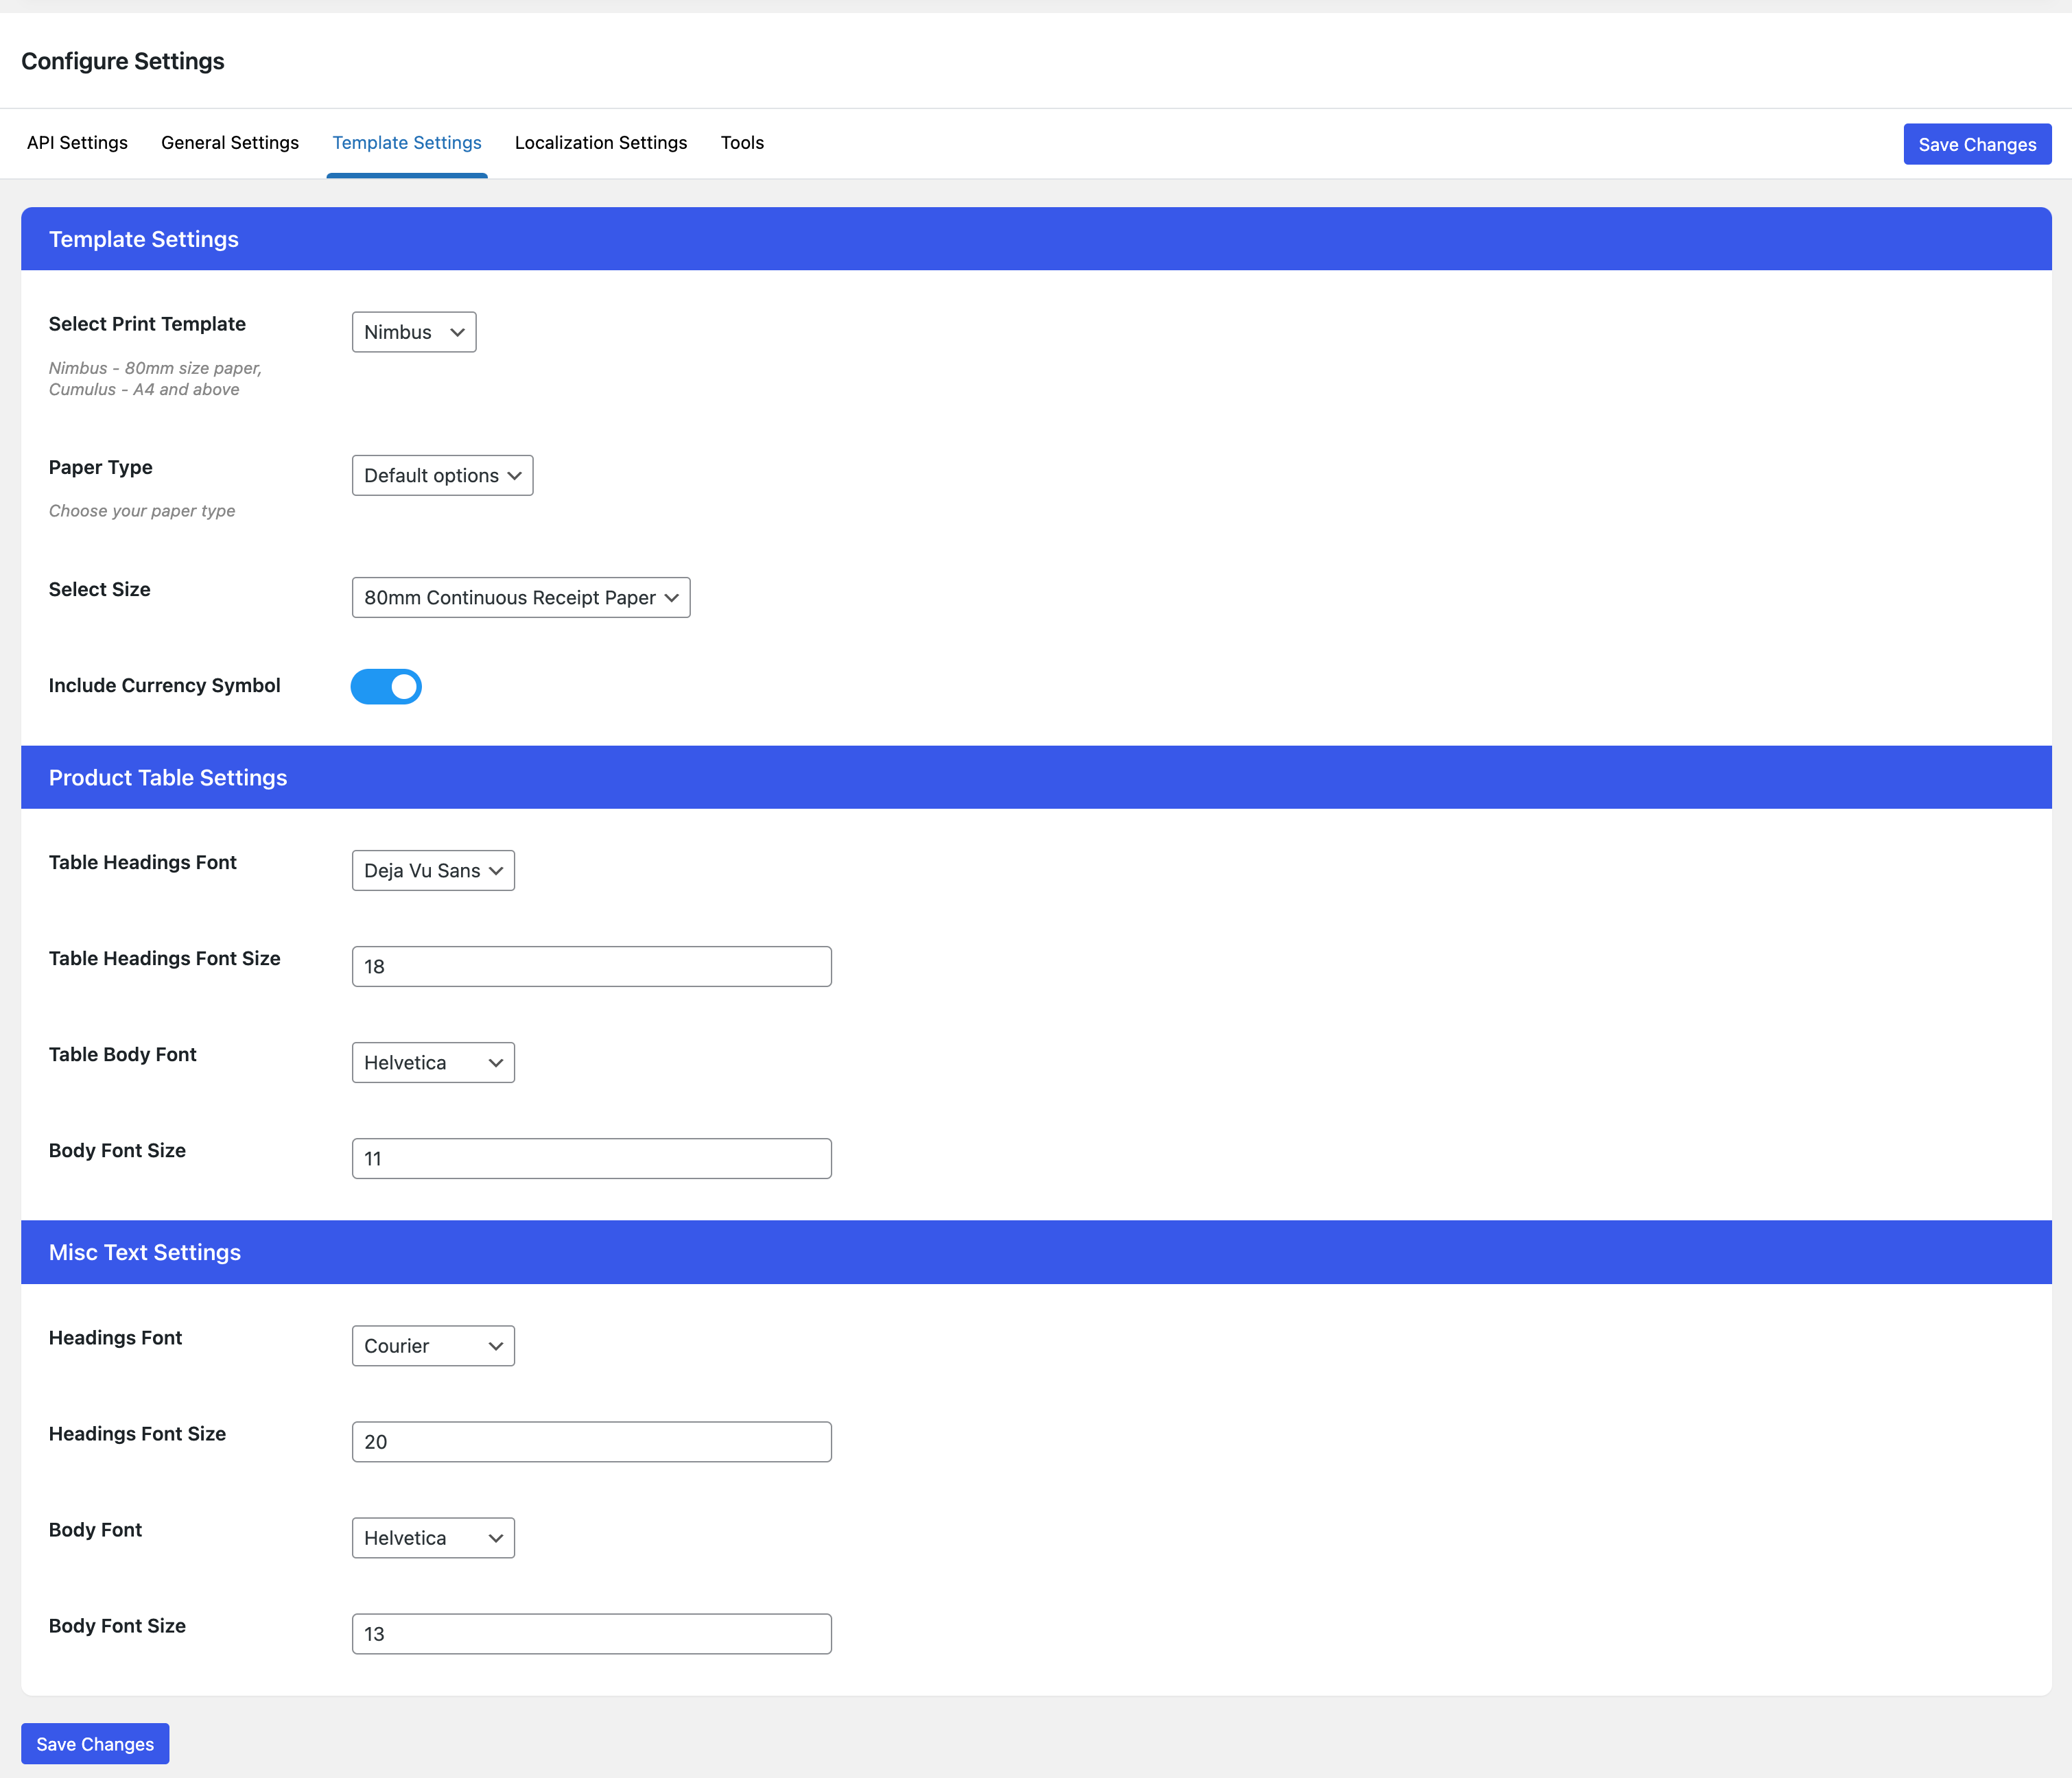 Plugin Template Settings. More settings and changes are available via plugin Action and Filters.